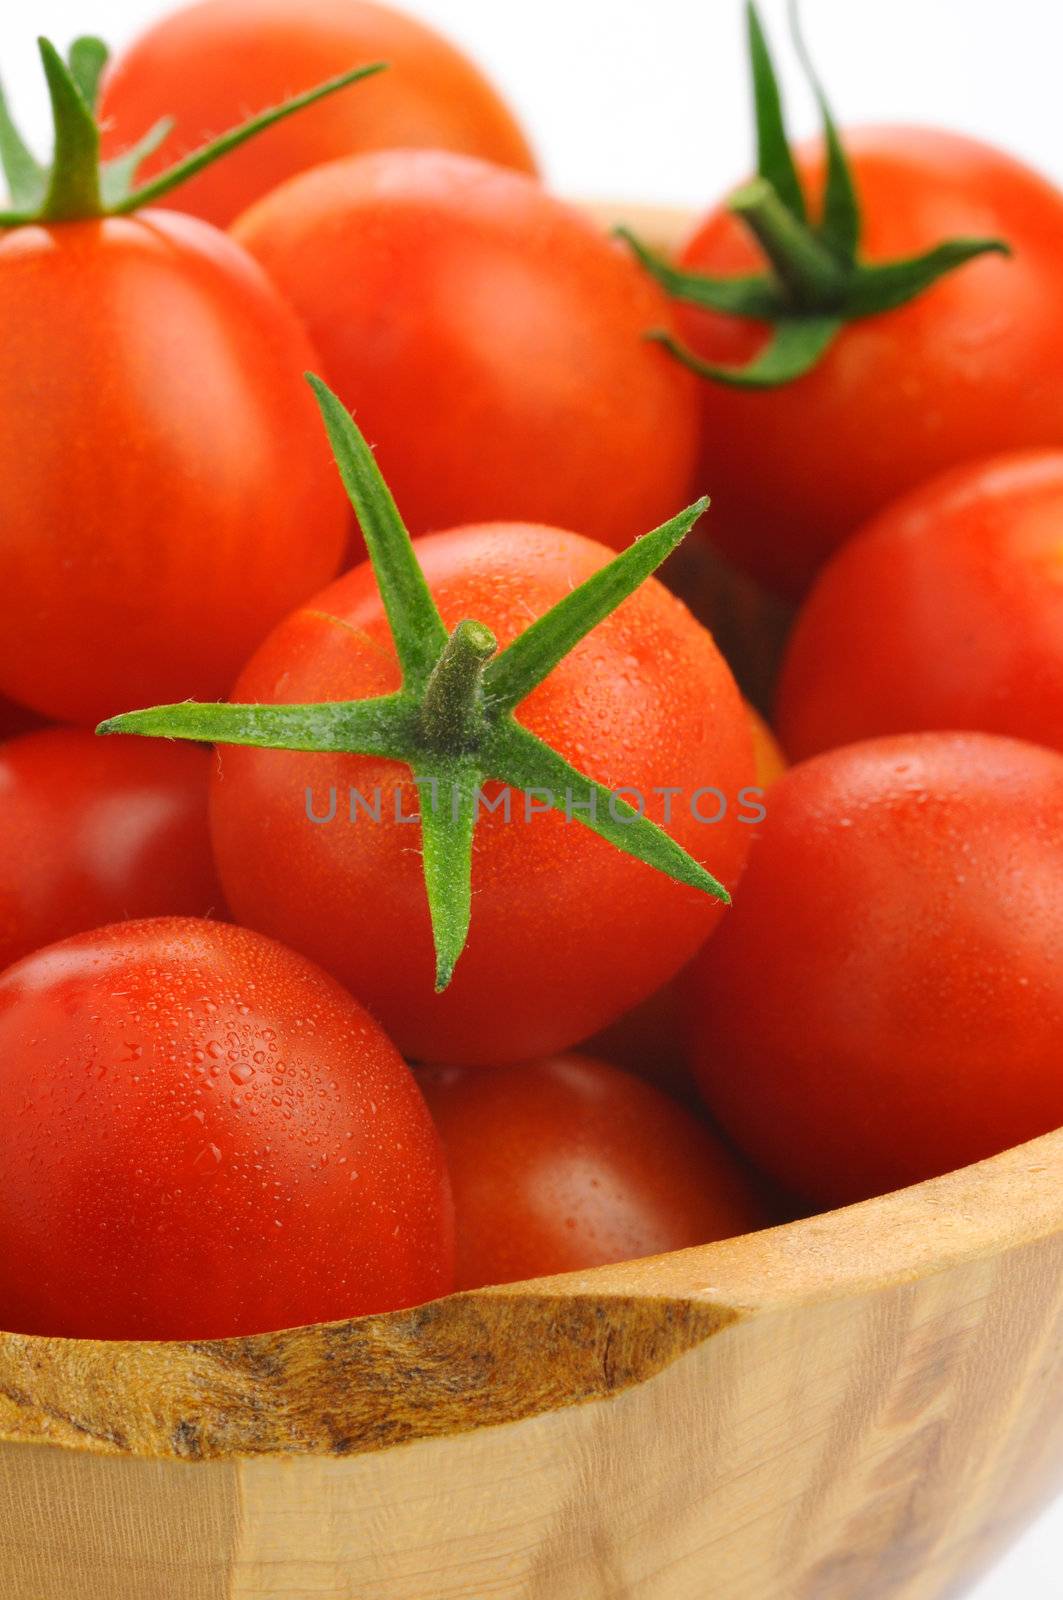 Fresh picked ripe cherry tomatoes photographed closeup.